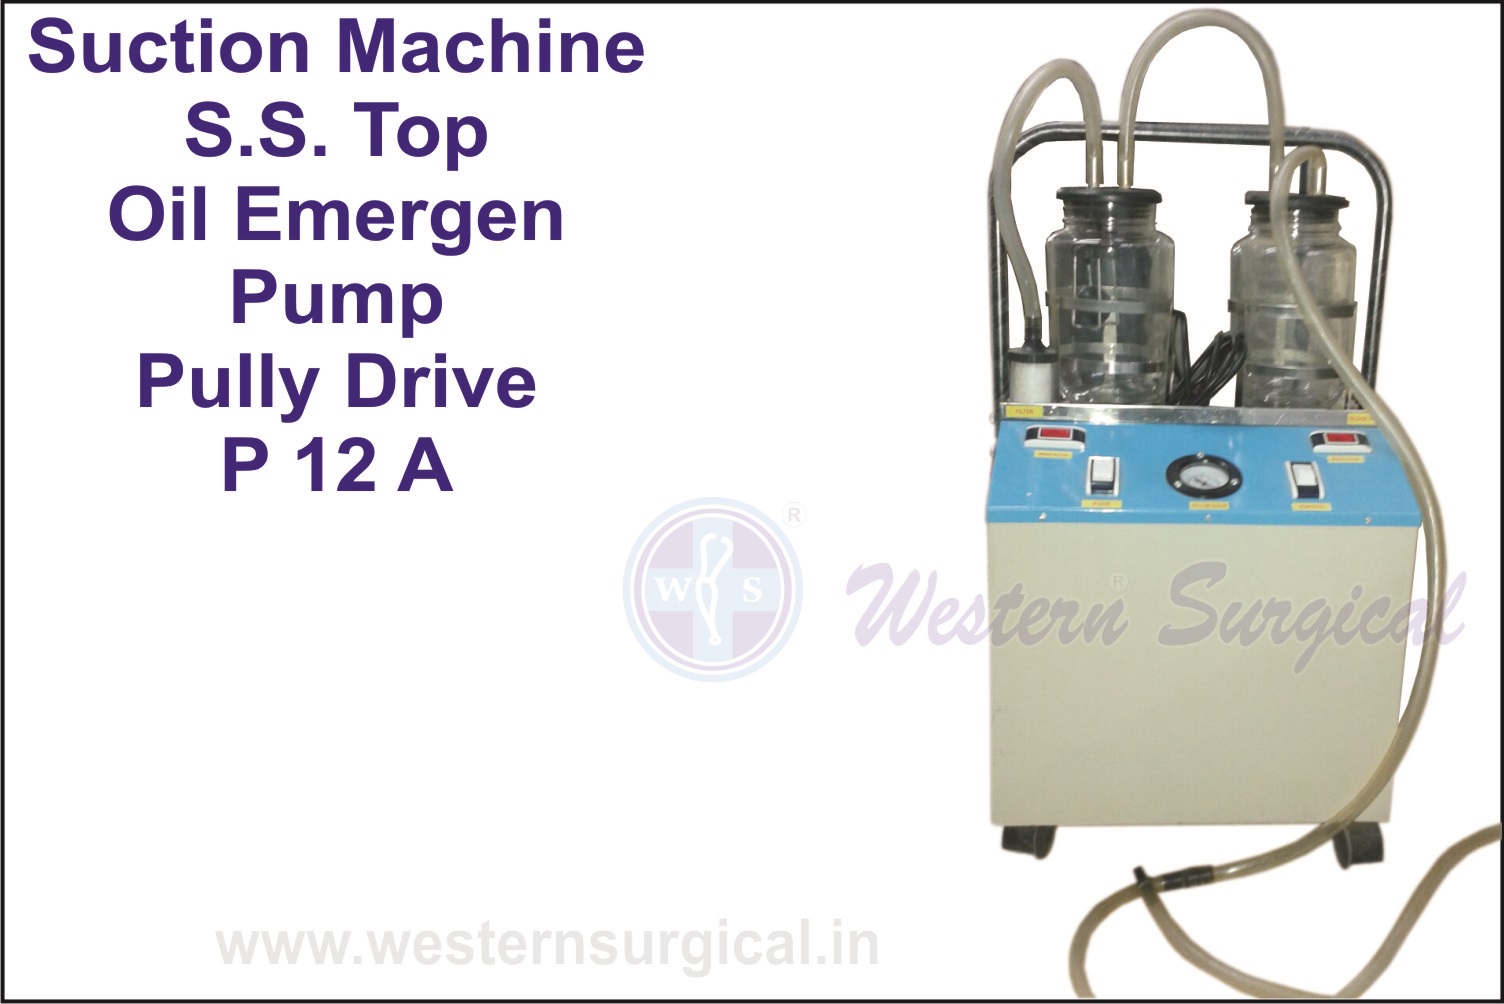 SUCTION  MACHINE  S.S. TOP  OIL  EMERGEN  PUMP  PULLY  DRIVE 